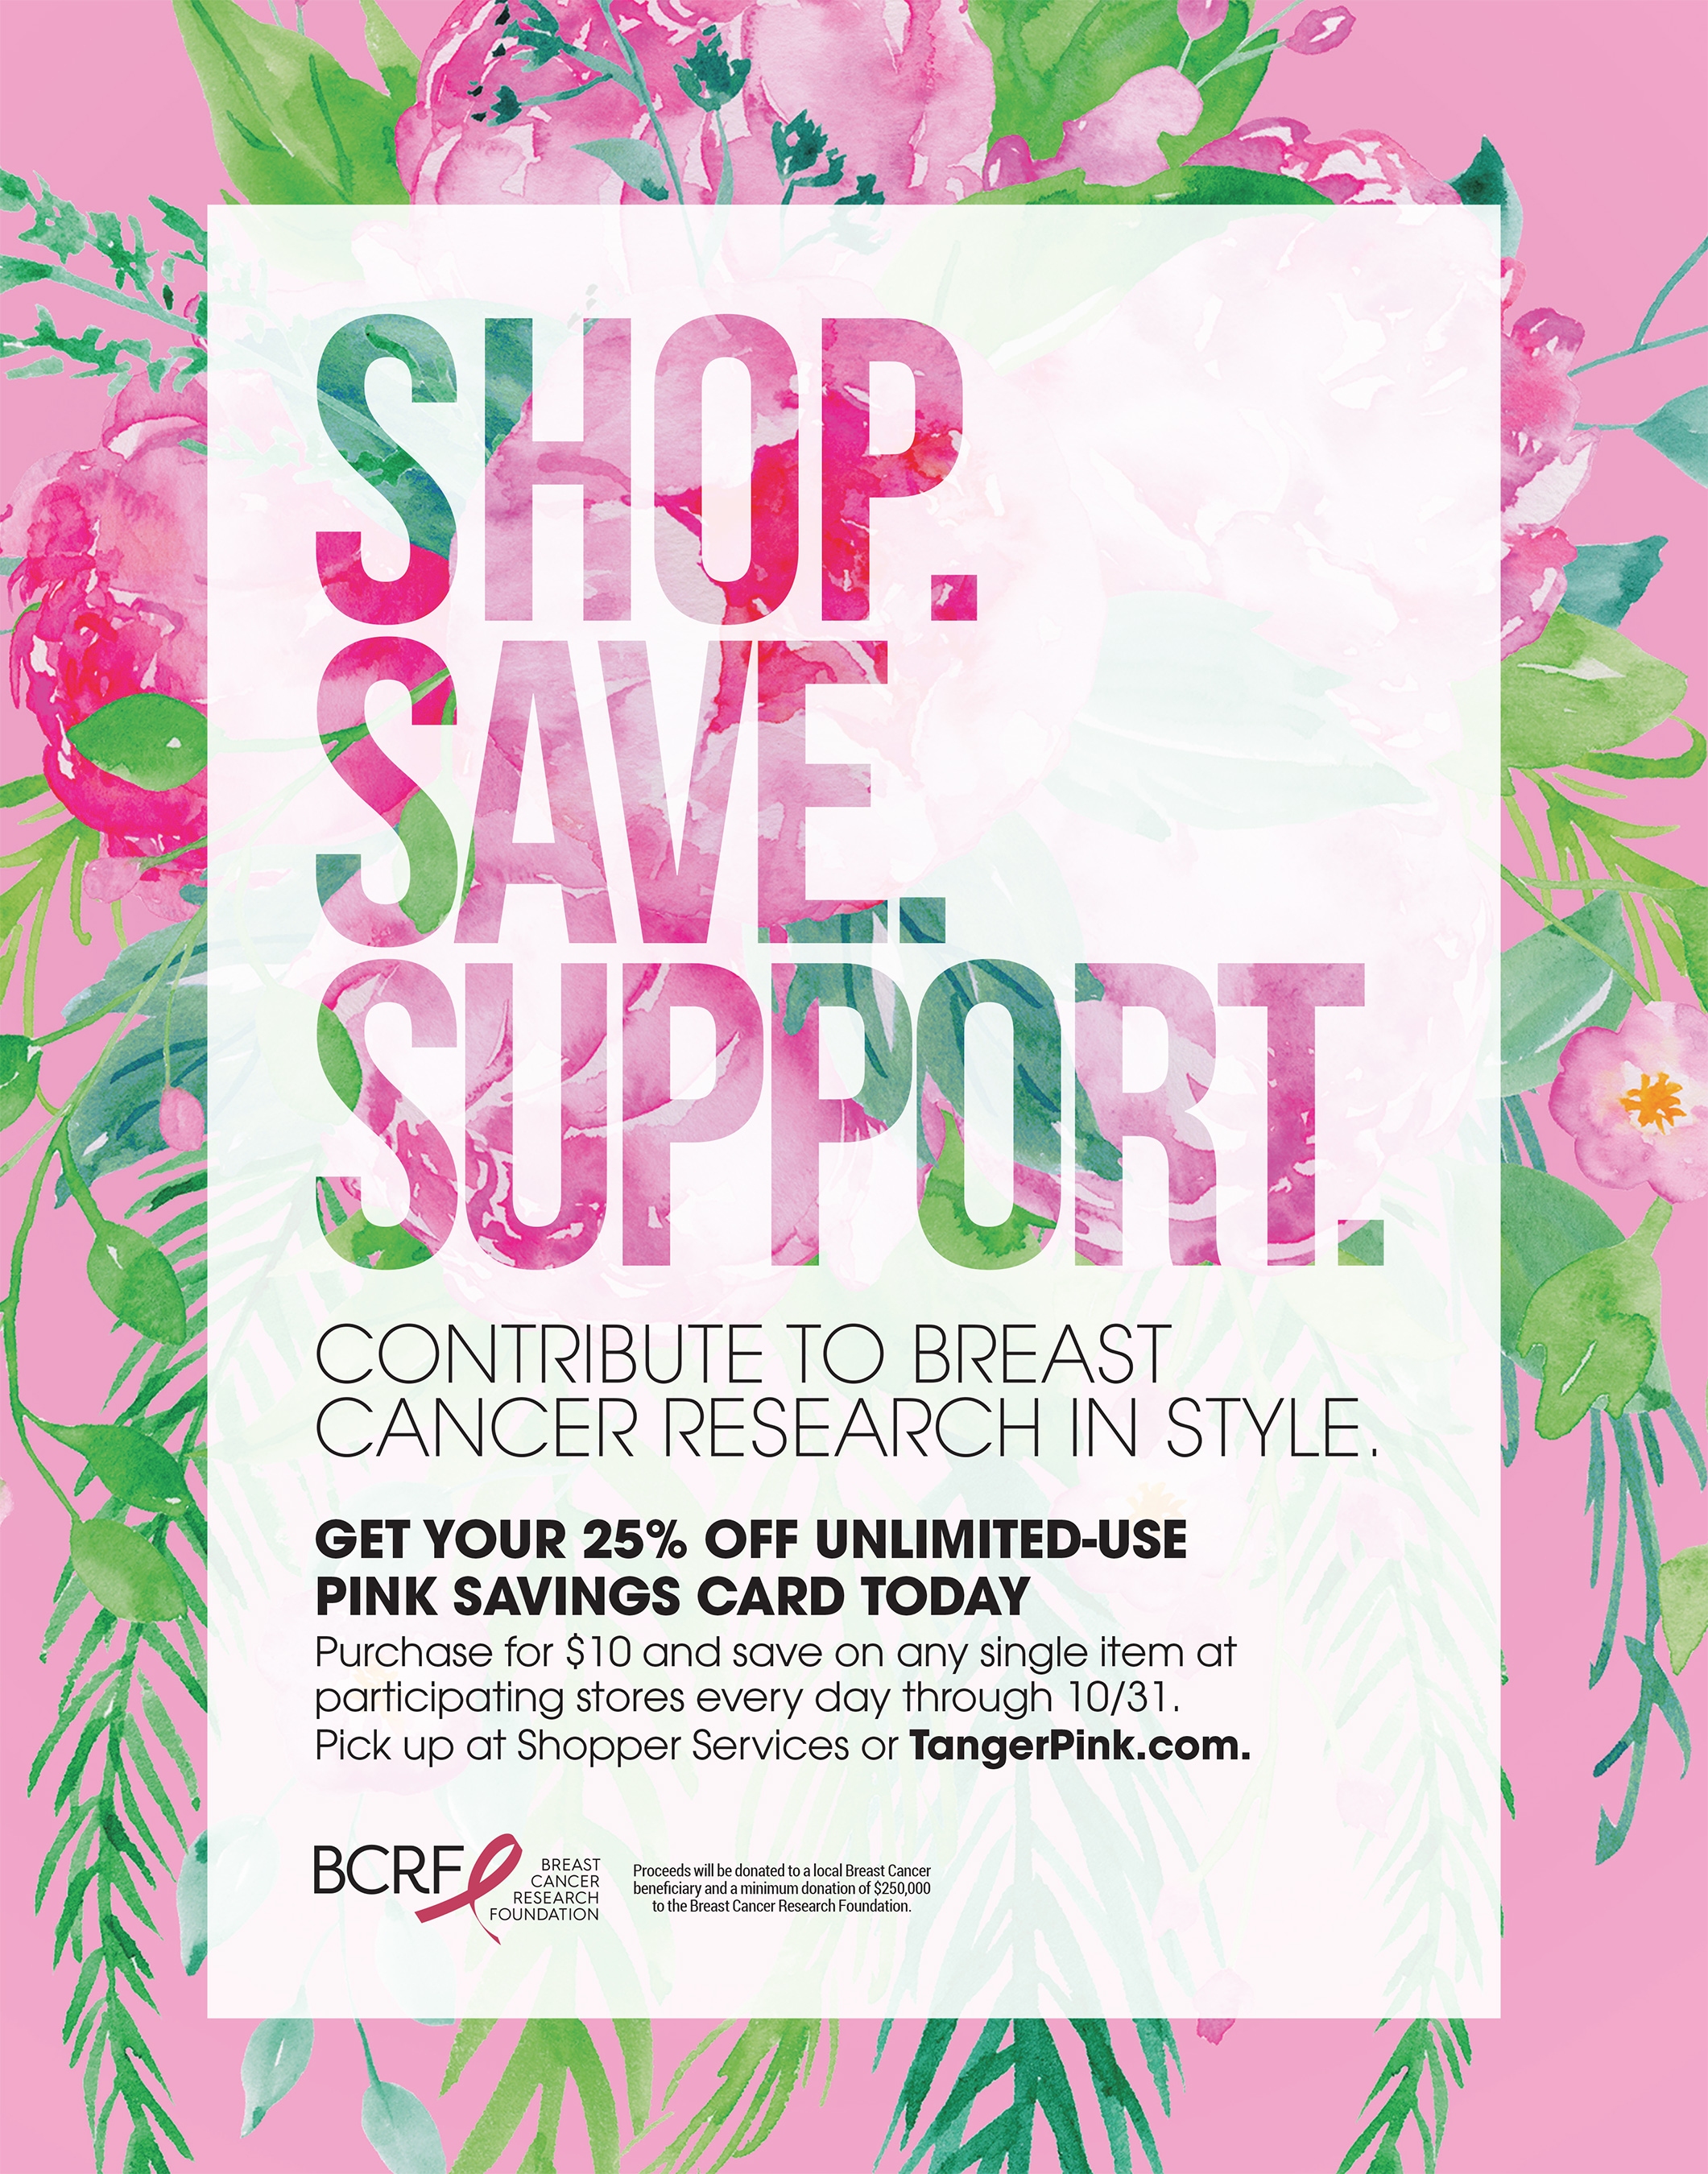 Contribute to breast cancer research in style